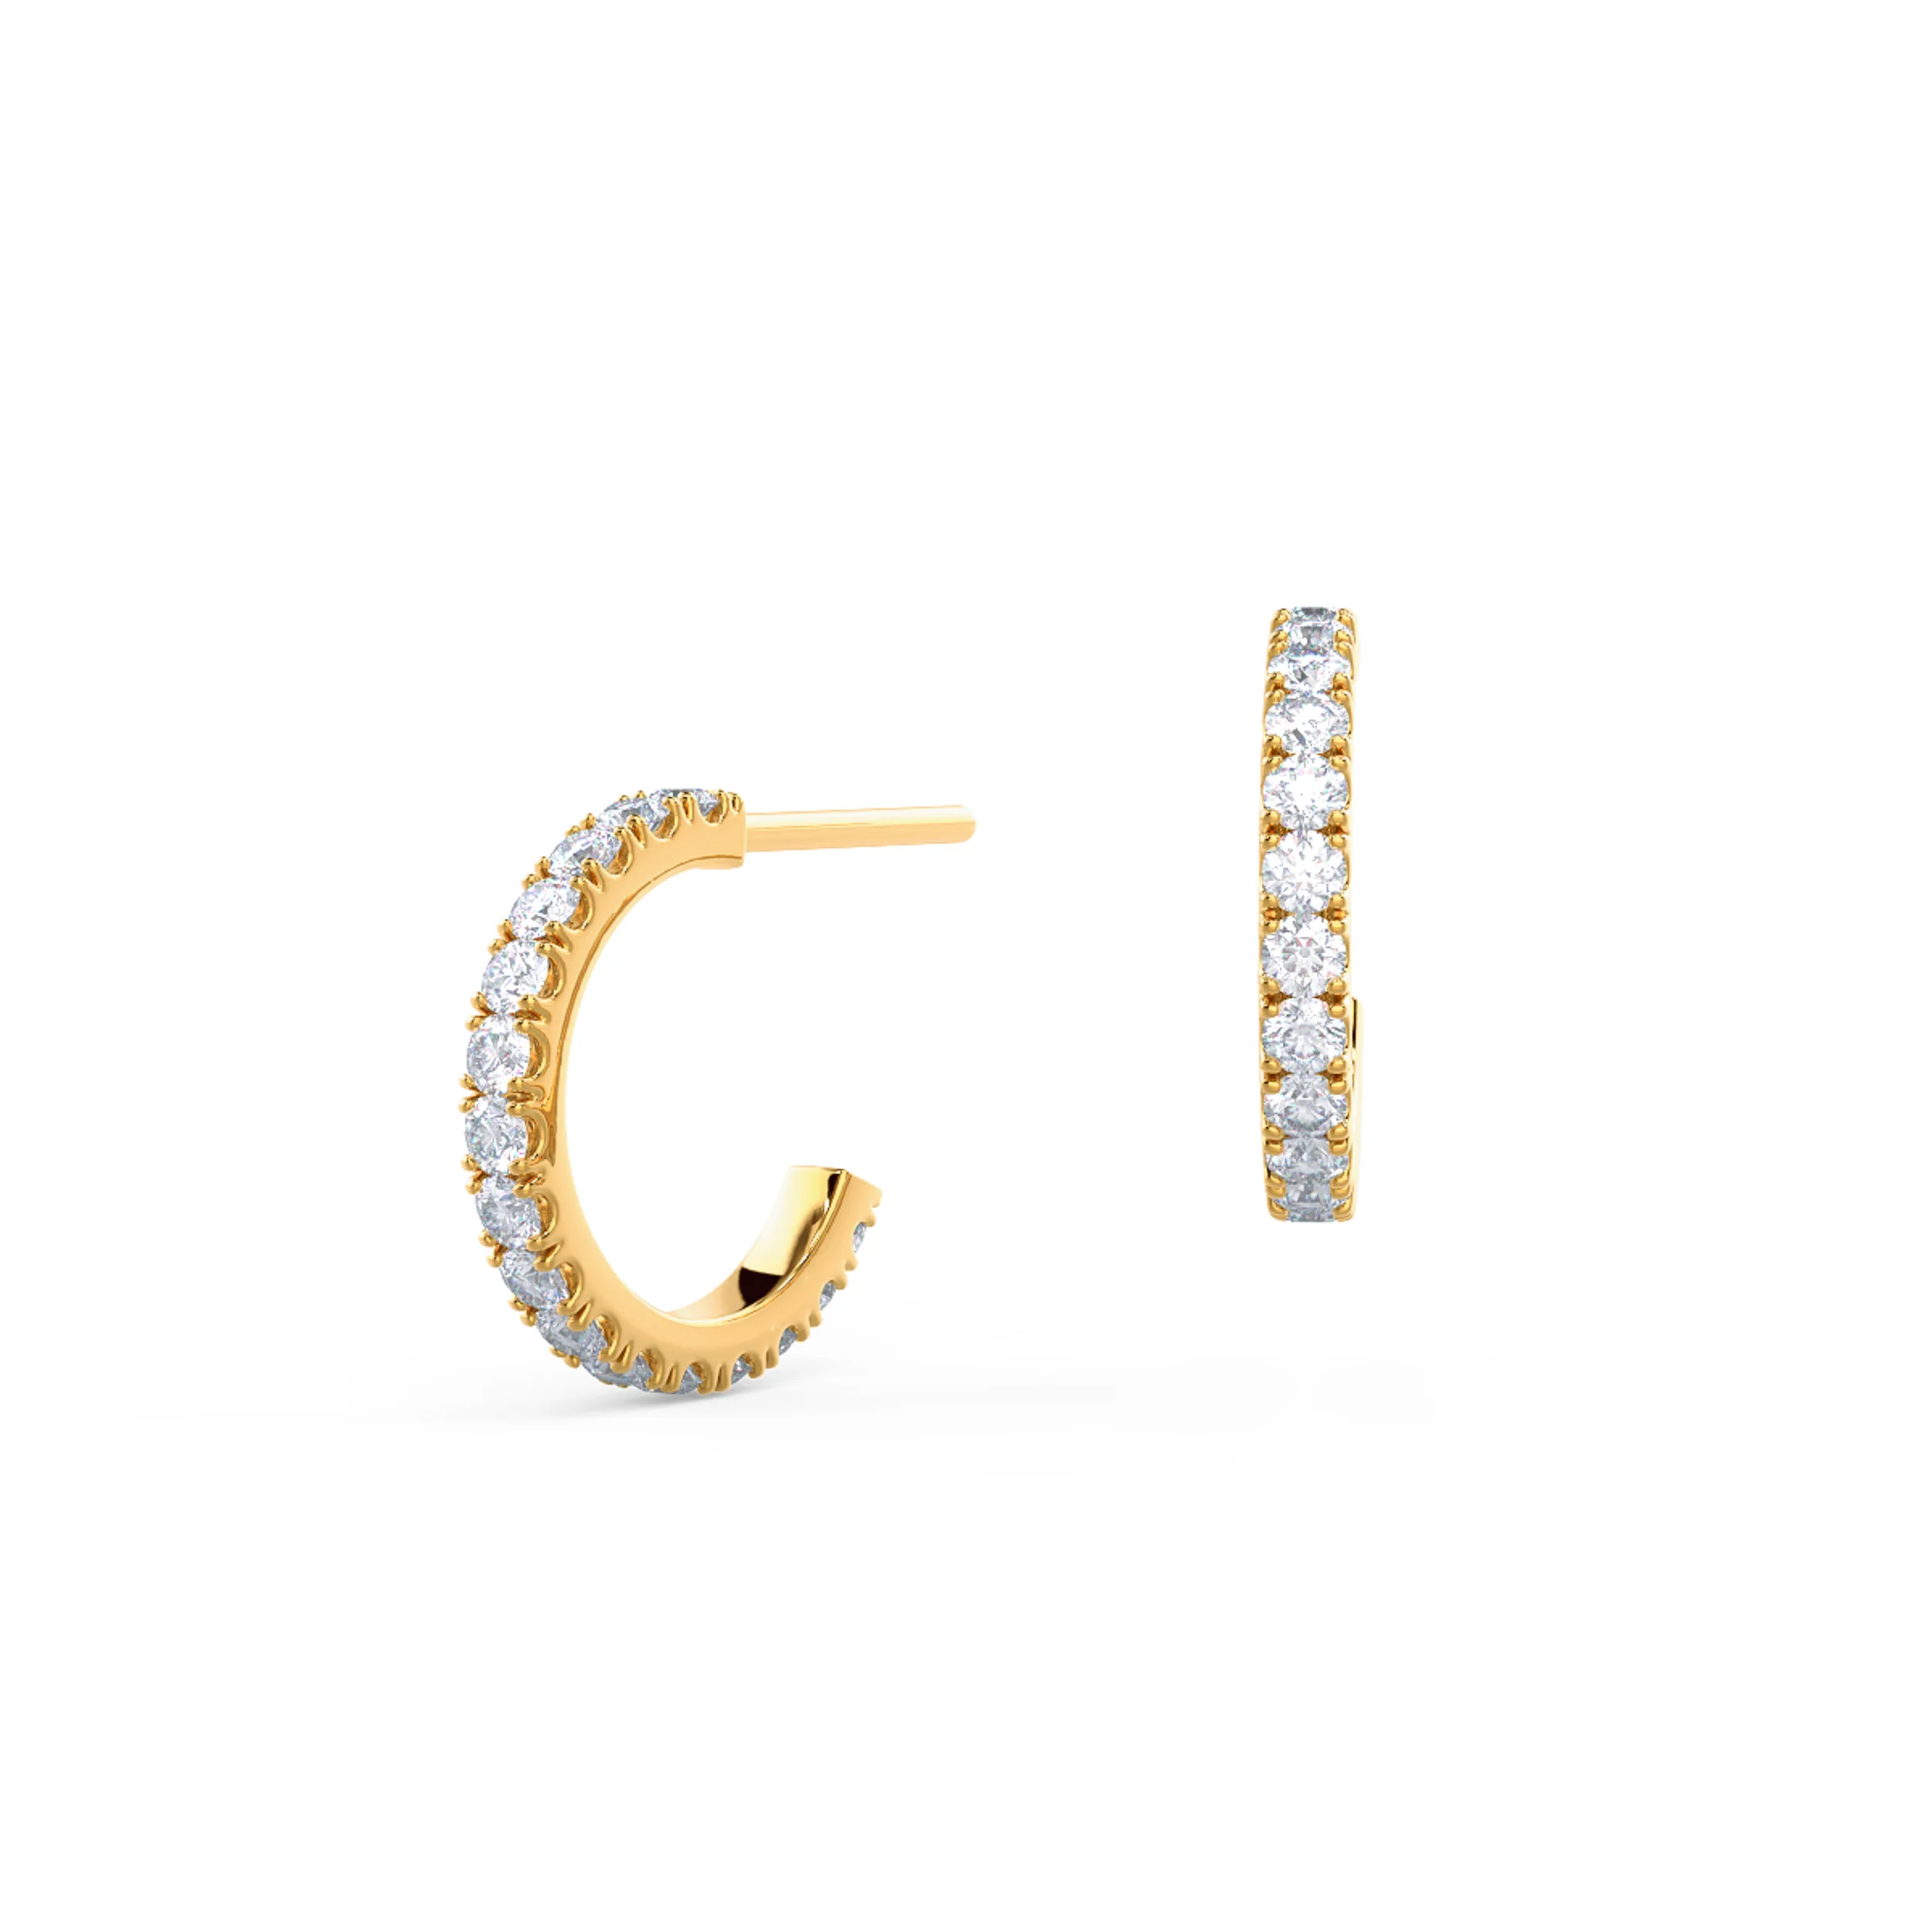 A classic pair of J-shaped huggie hoops featuring pave set lab created diamonds with a tension back in 14k Yellow Gold